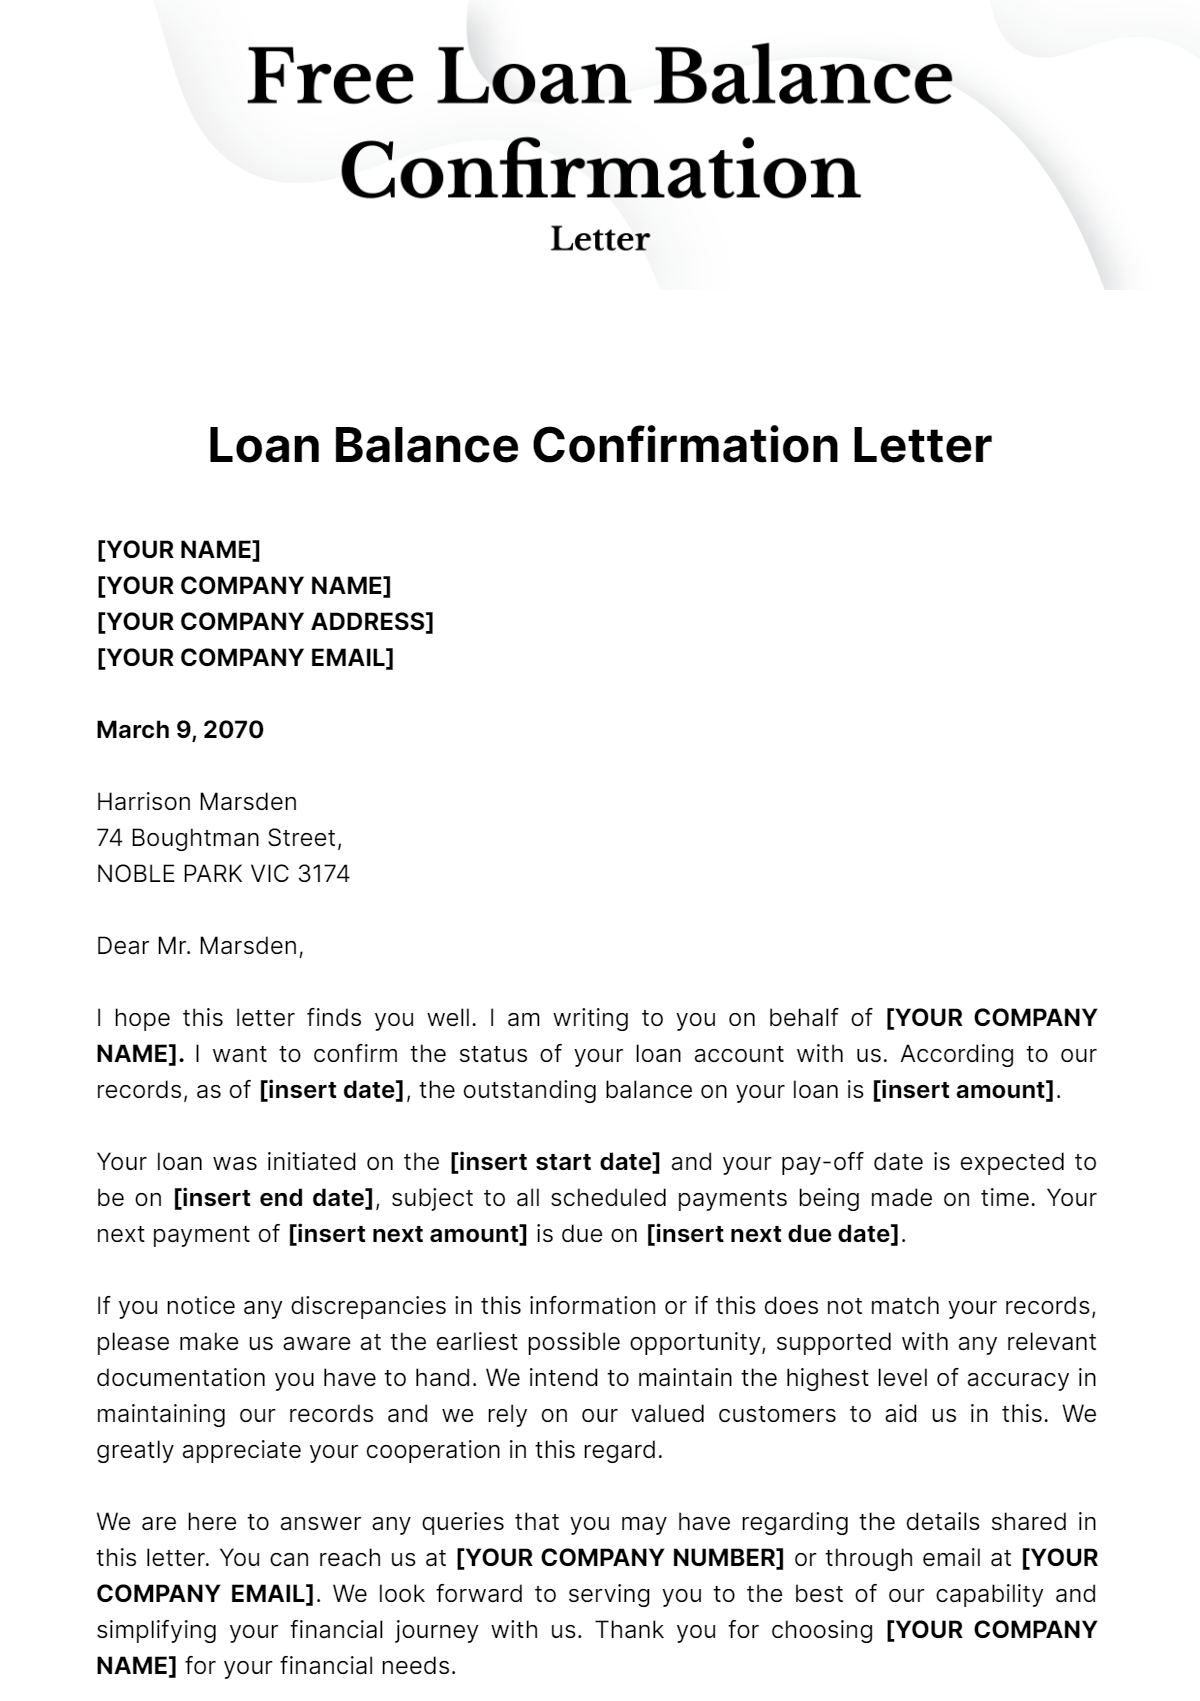 Free Loan Balance Confirmation Letter Template